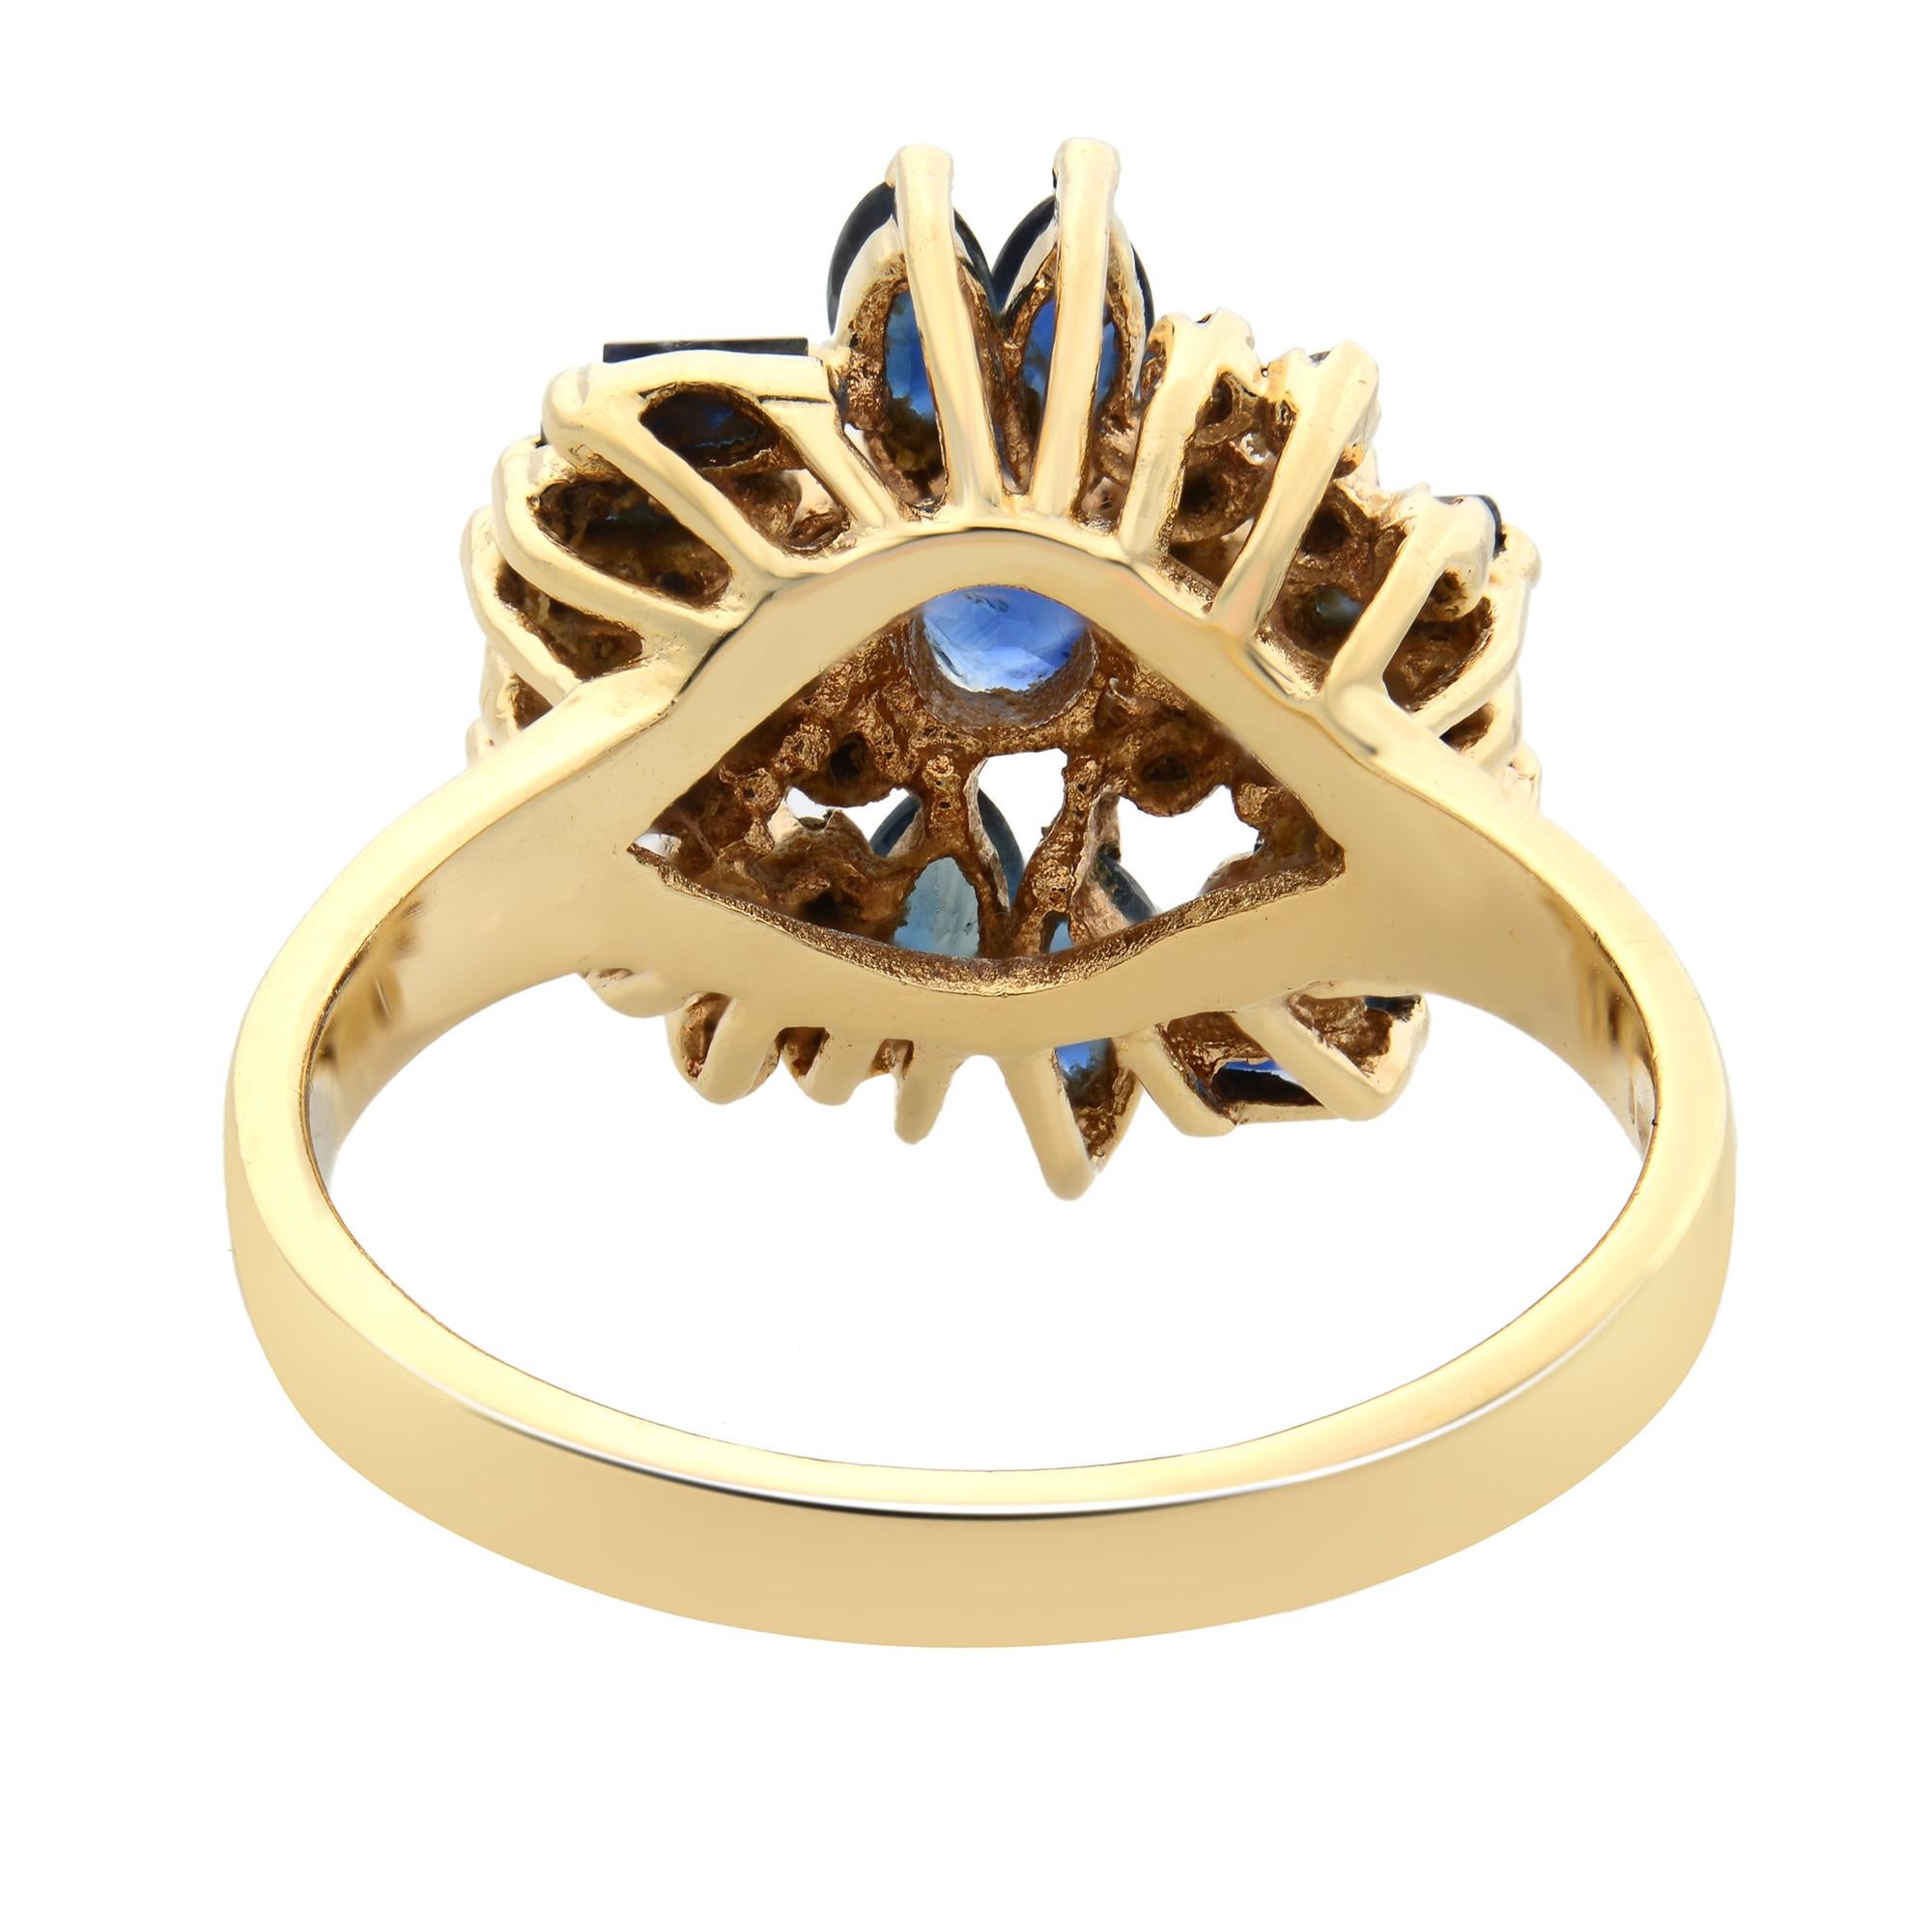 Rachel Koen Blue Sapphire & Diamond Cocktail Ring 14k Yellow Gold In Excellent Condition For Sale In New York, NY